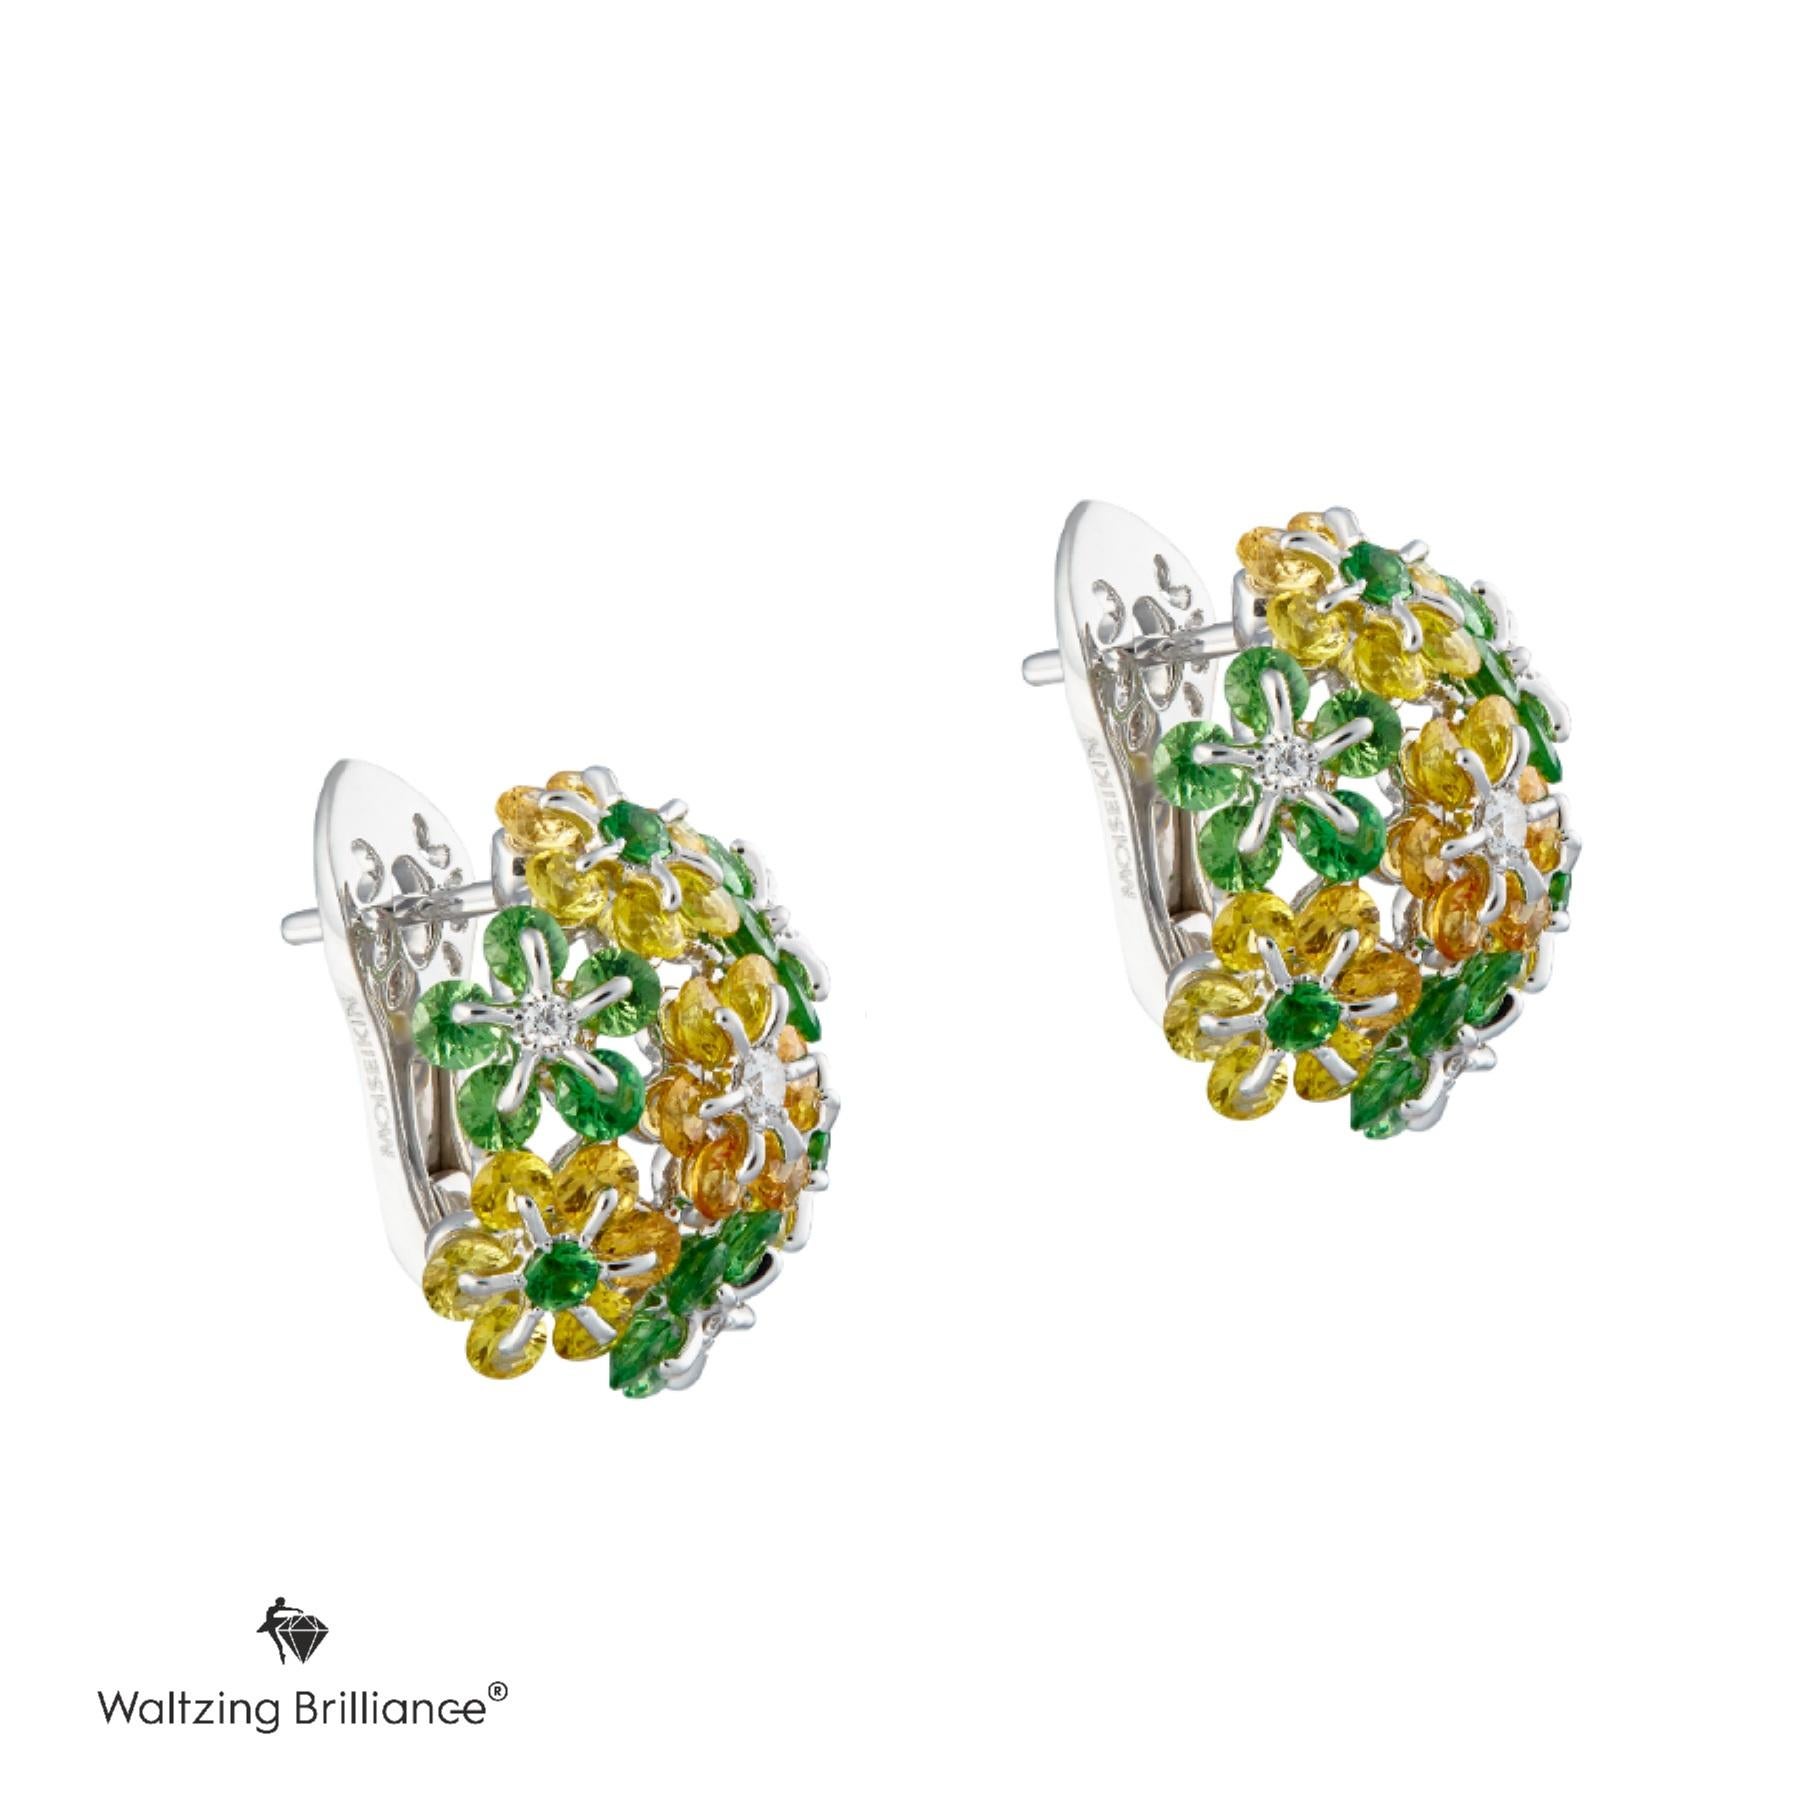 
The diamond-cut vivid tsavorite and golden sapphires harmoniously dance on the airy stage creating a magical glow as if reflecting the waltz of the post-summer heat and the autumn shine. The green tsavorites echo with warm, ripe sapphires. The